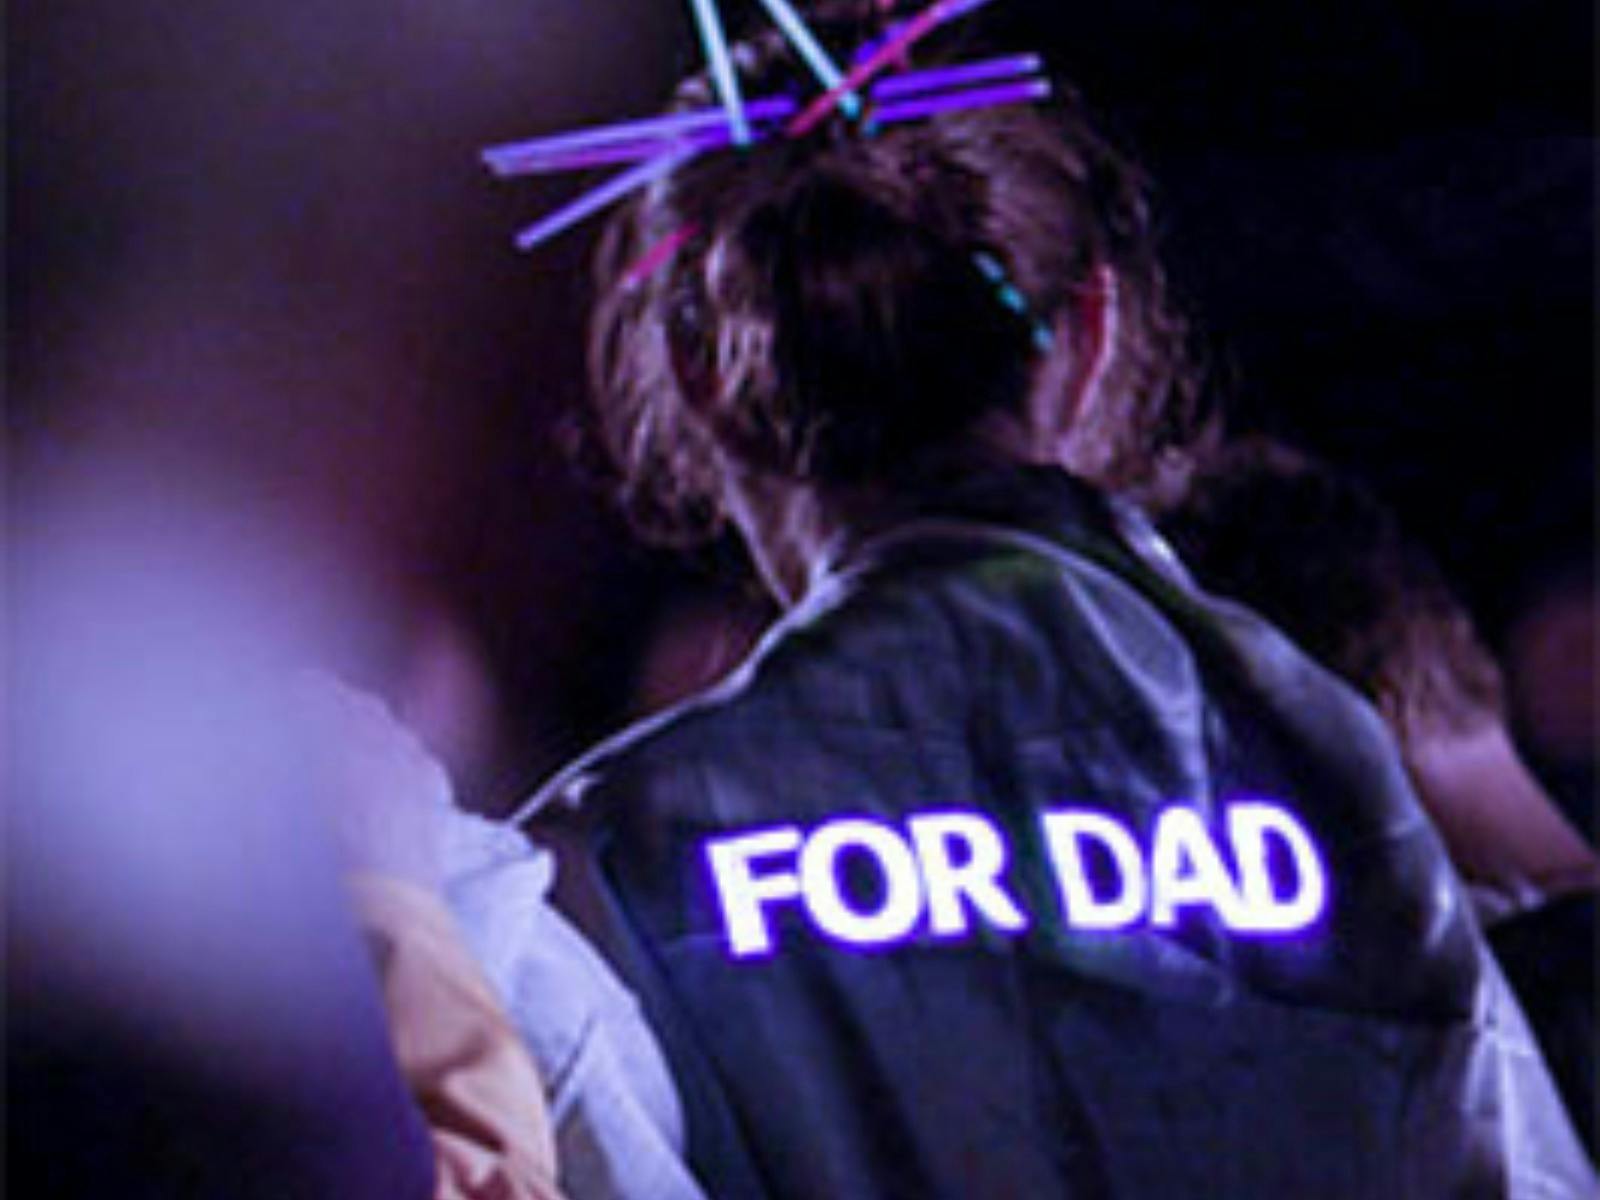 Relay for Dad